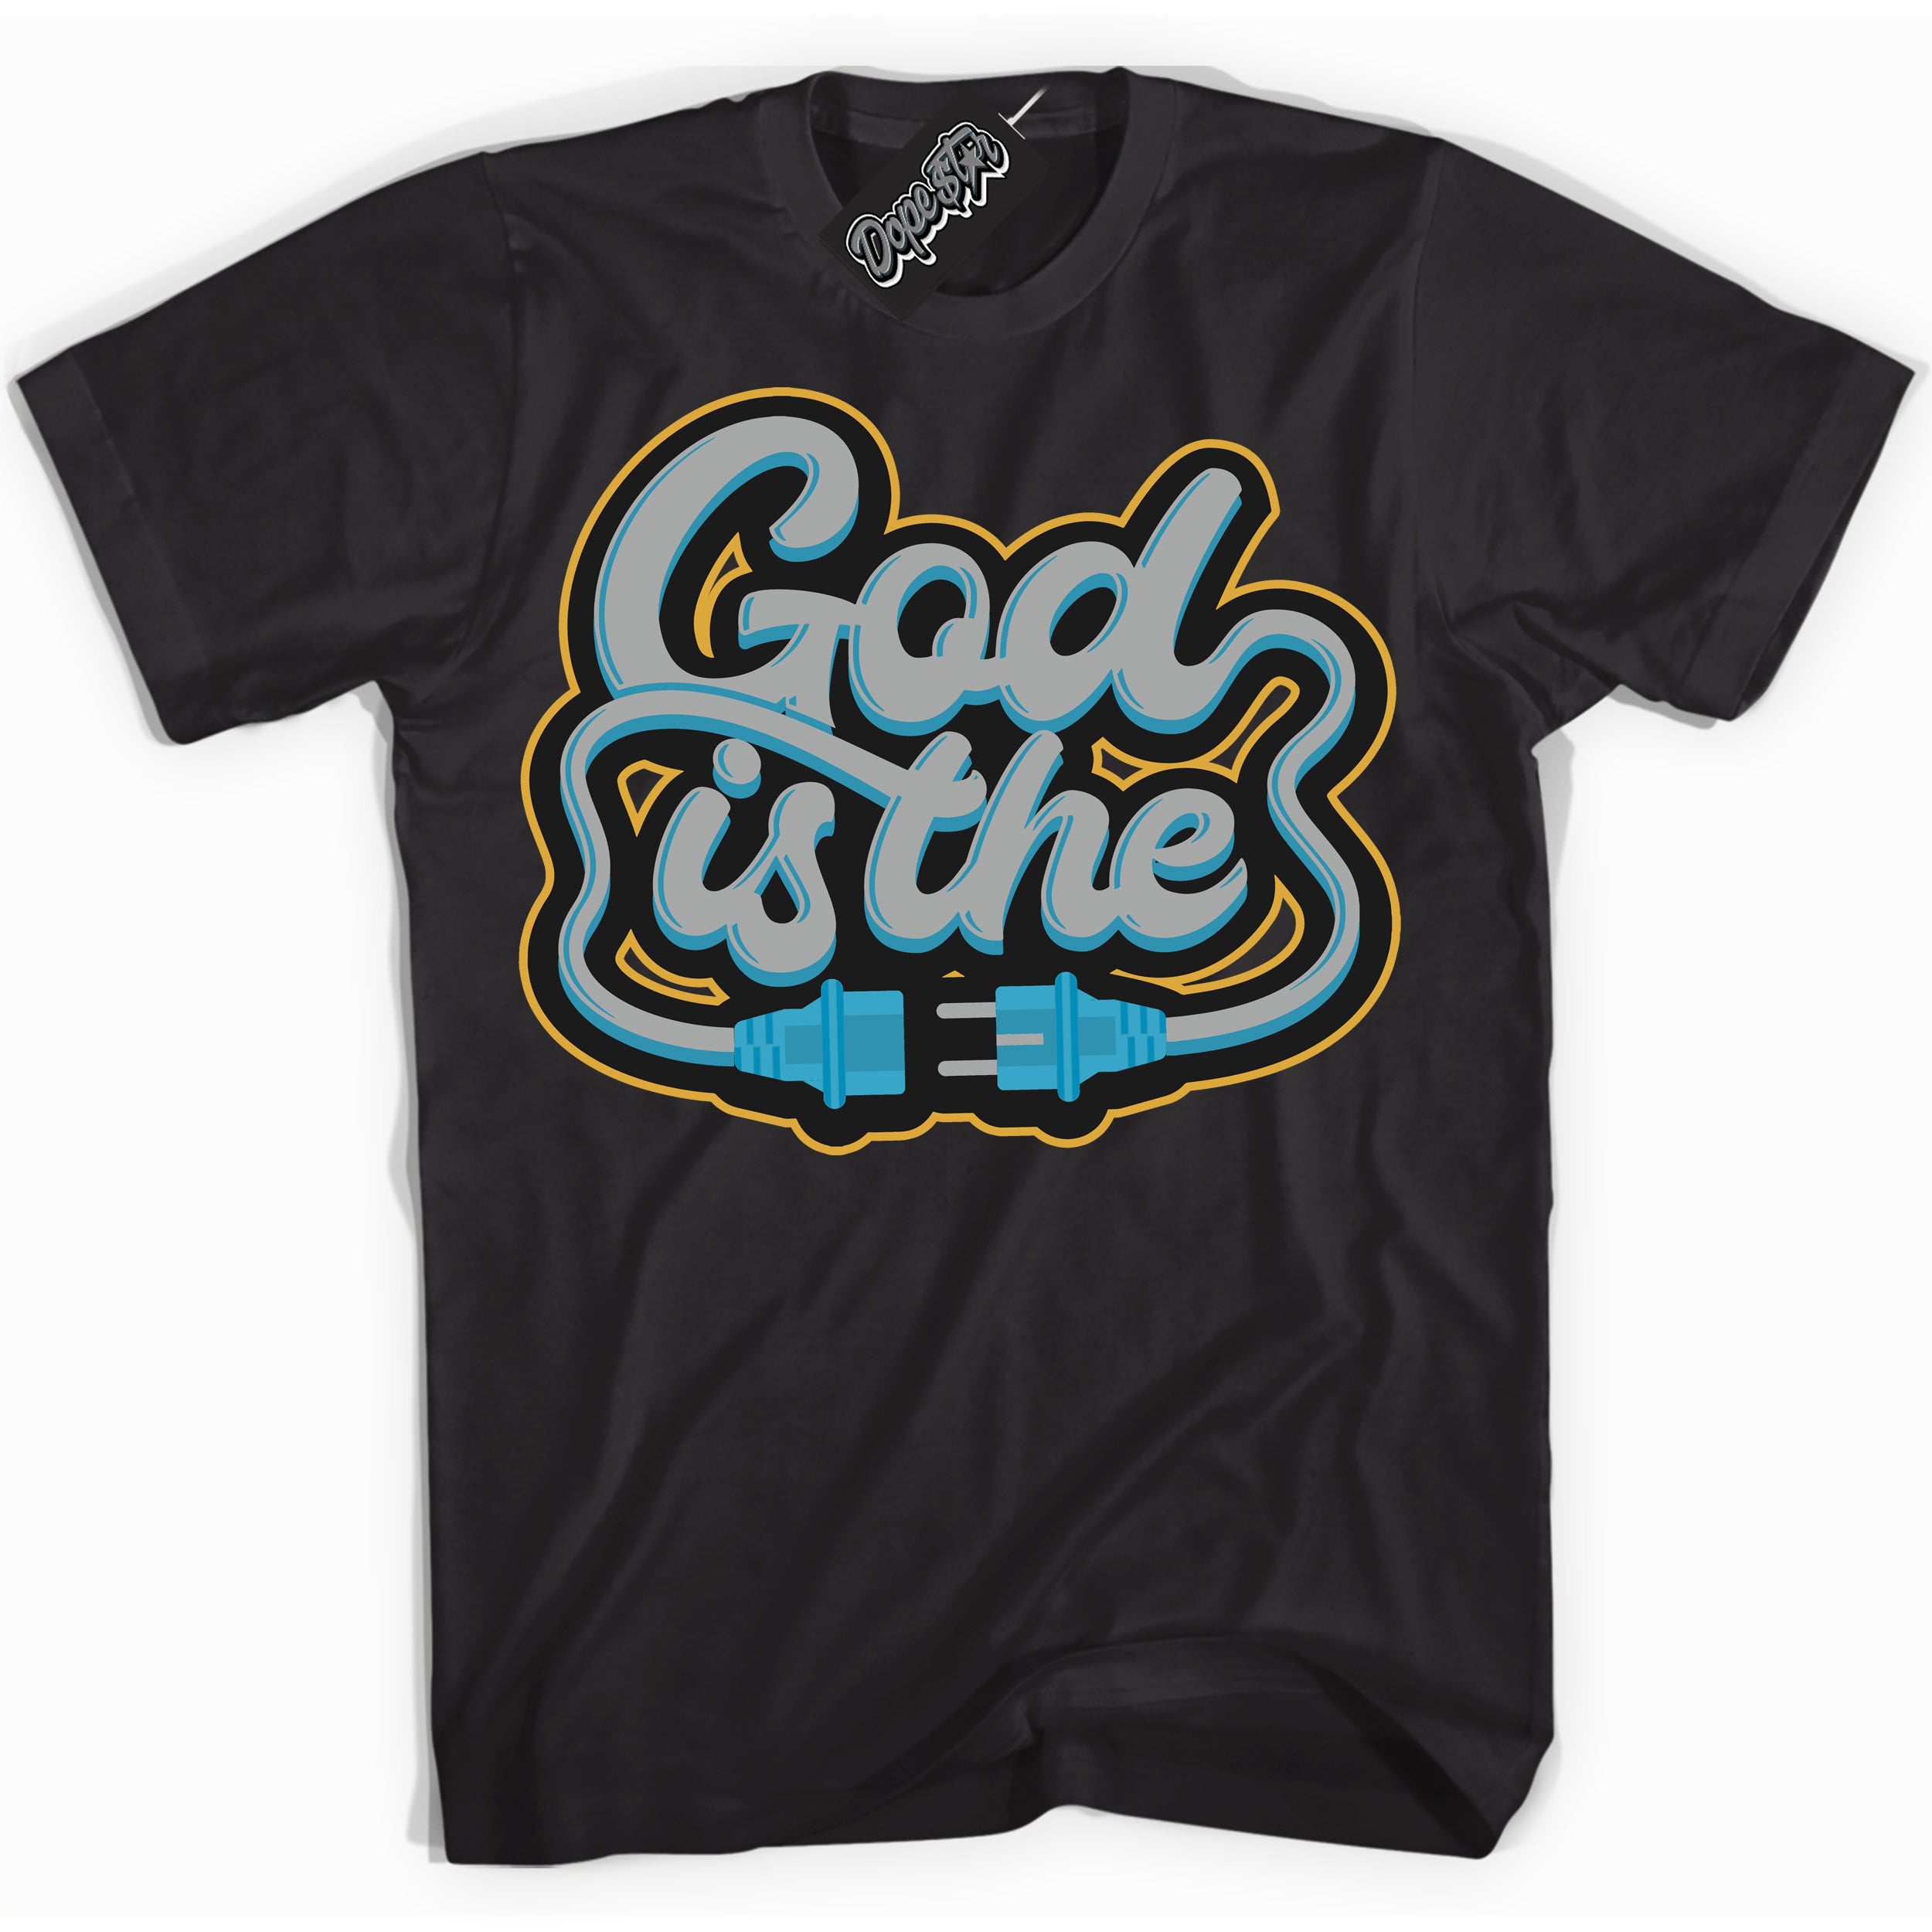 Cool Black Shirt with “ God Is The” design that perfectly matches Aqua 5s Sneakers.